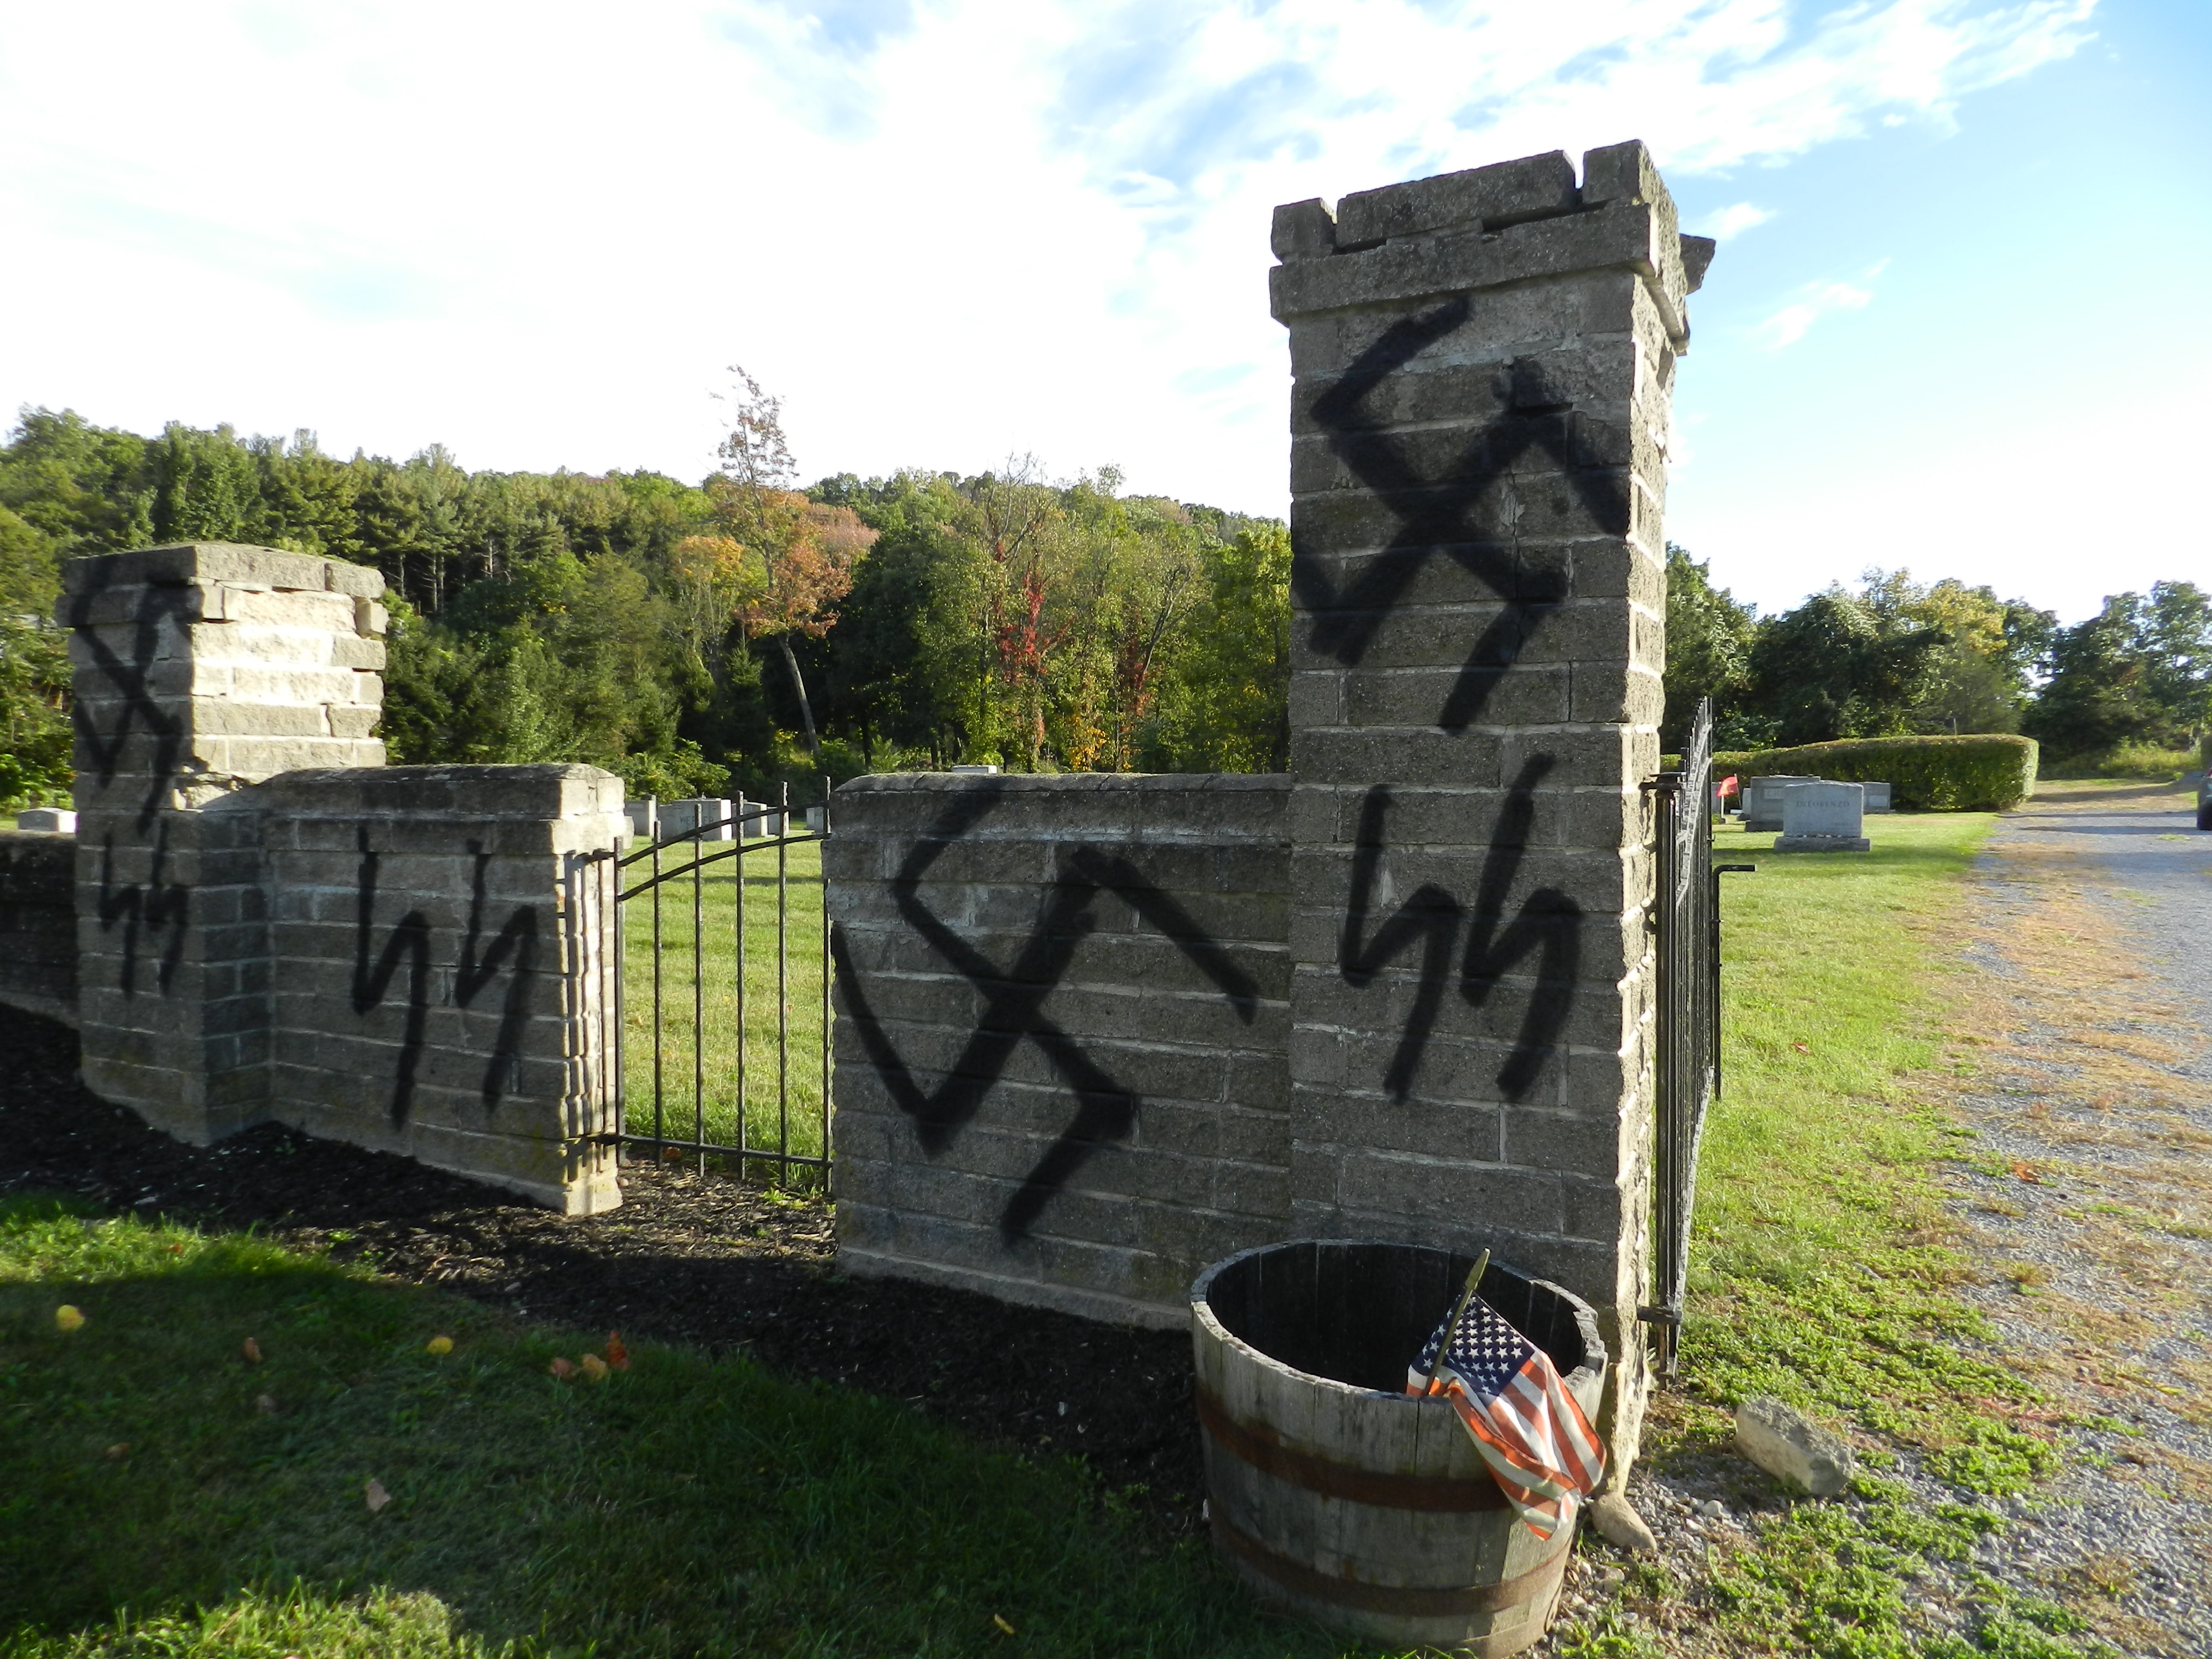 Temple Beth Shalom's cemetery in the Town of Warwick was found desecrated with anti-Semitic graffiti on Oct. 9, 2016. (Gittel Evangelist—TIMES HERALD-RECORD)